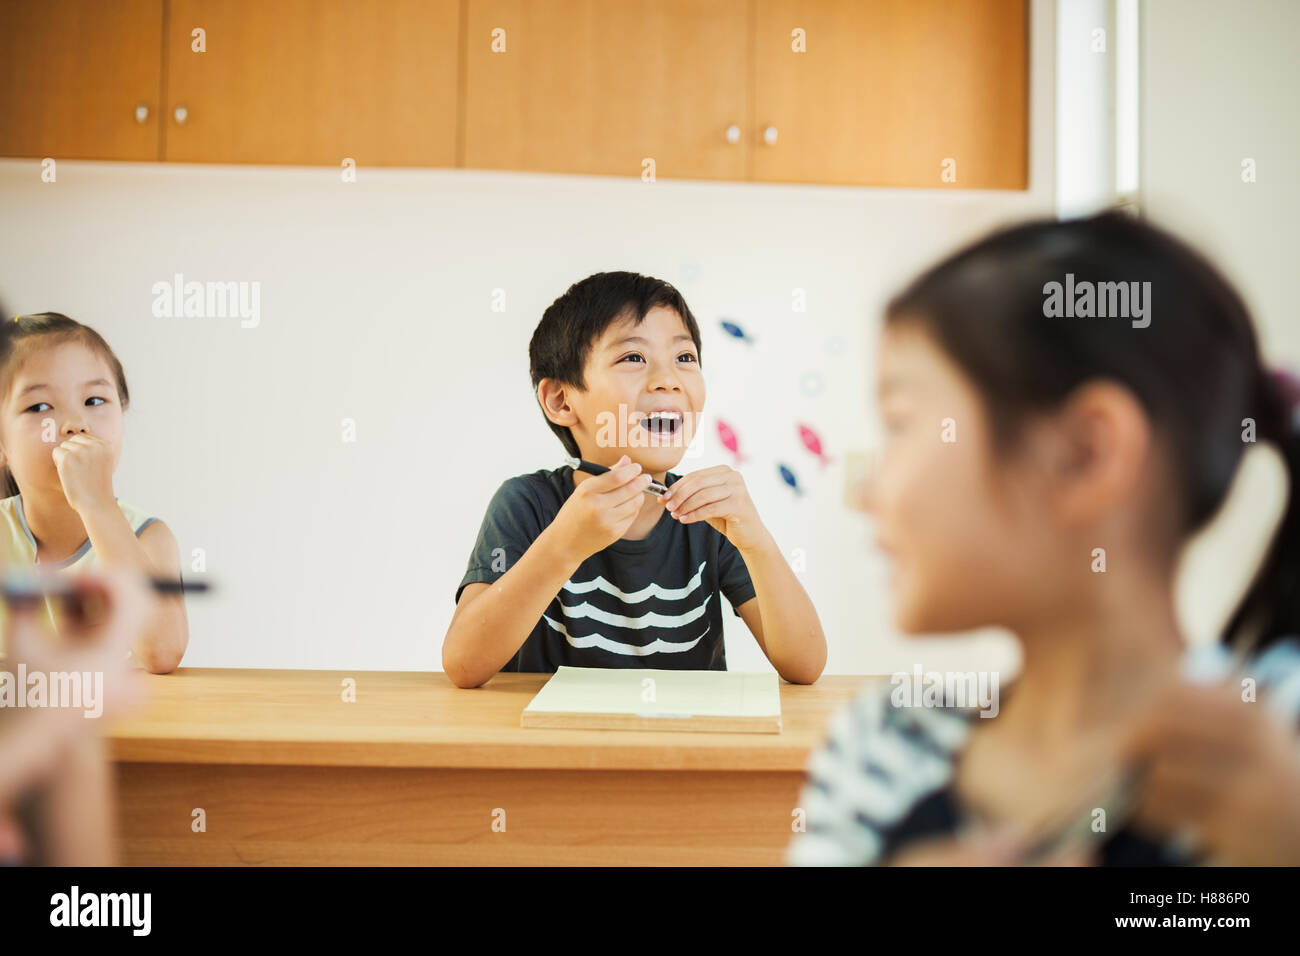 Three children, a boy and two girls in a classroom. Stock Photo